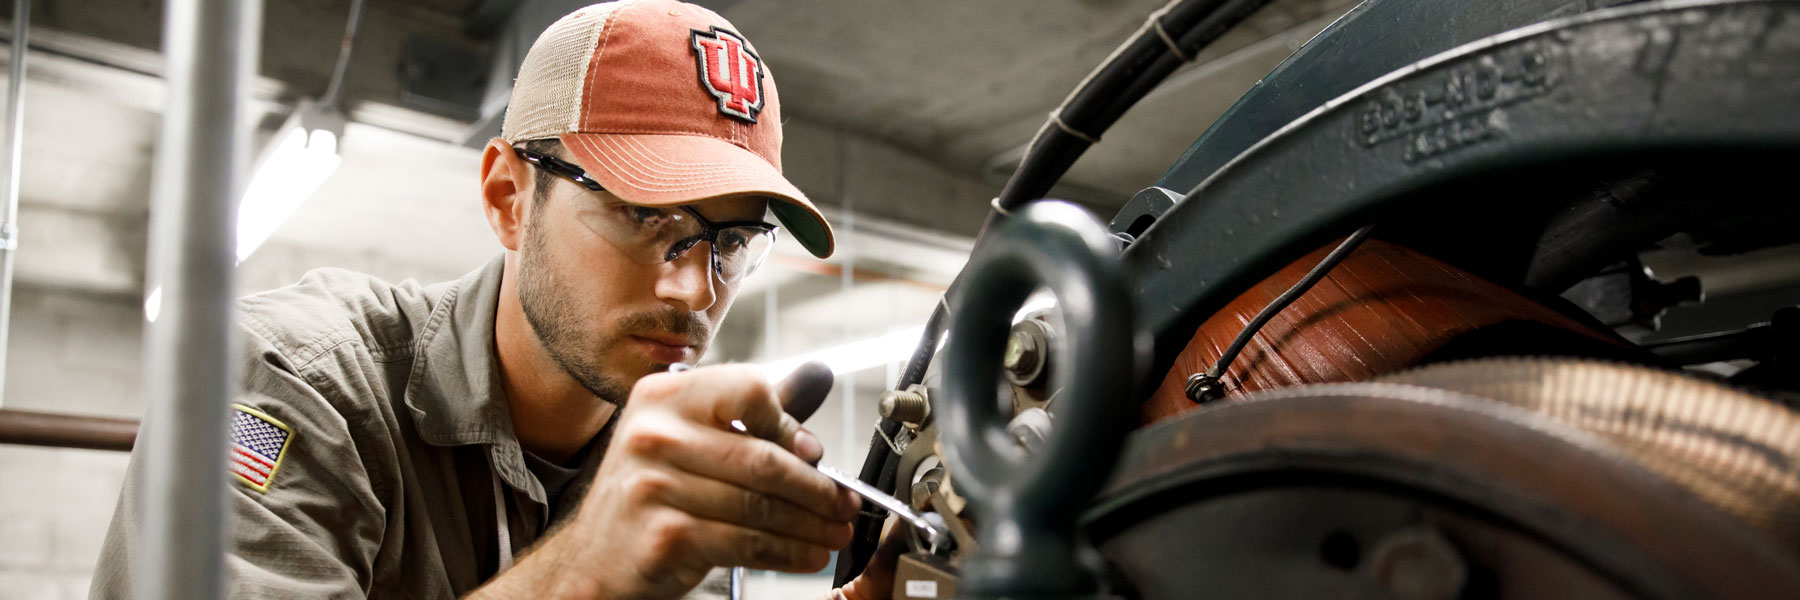 Young worker wearing IU cap uses tools in machine shop.